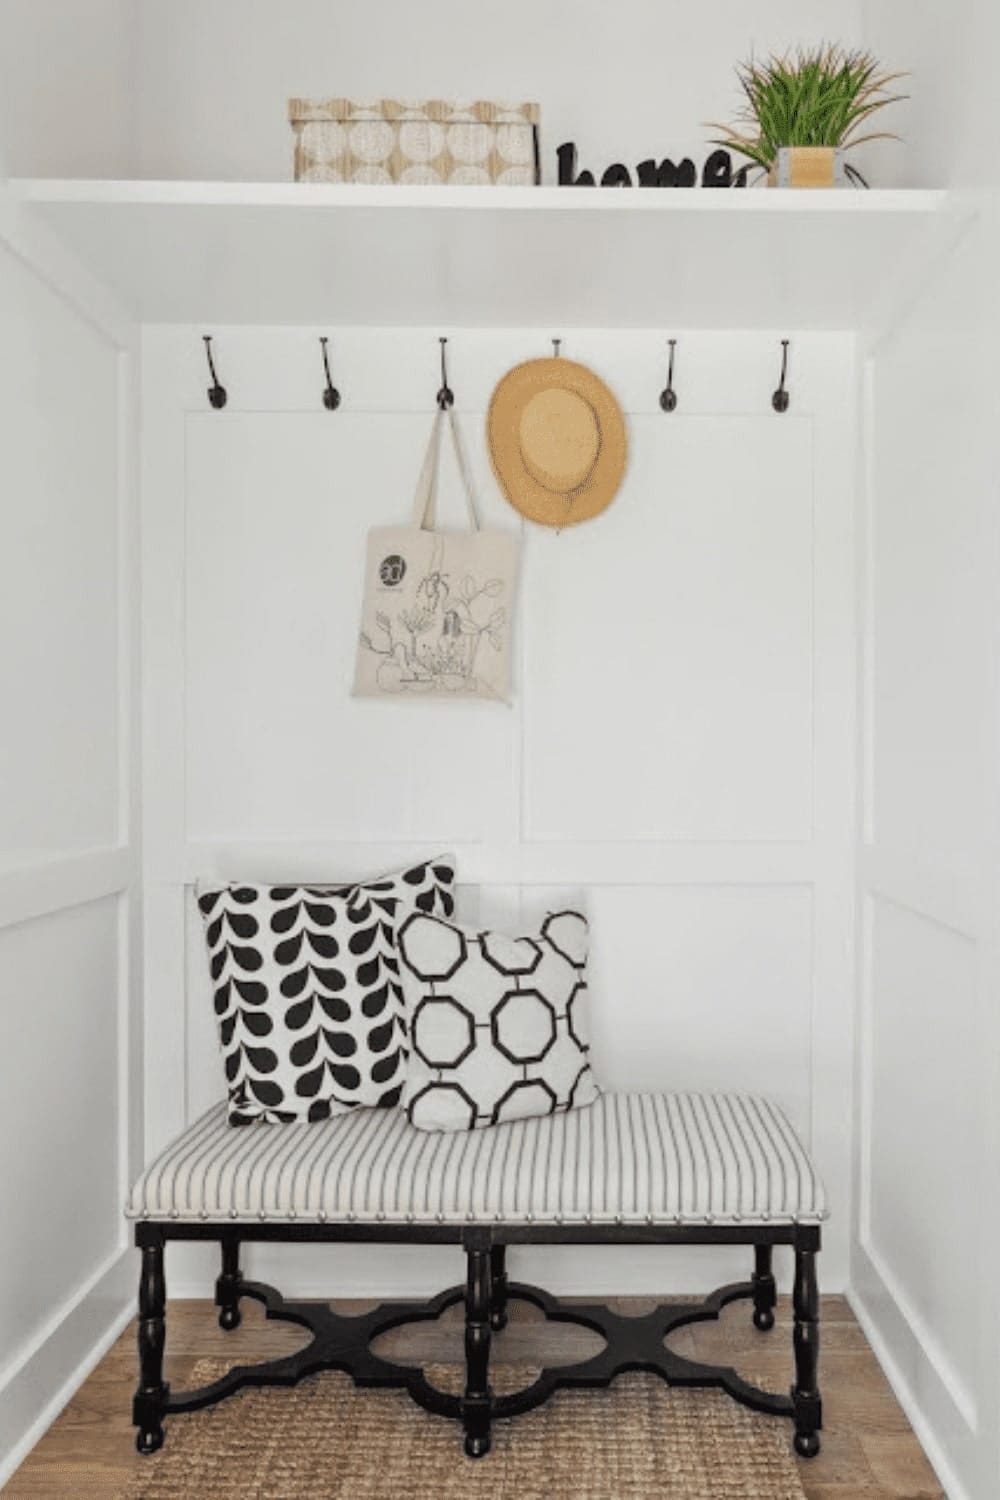 A white bench adorned with a hat rack and cushions, providing a comfortable seating option.